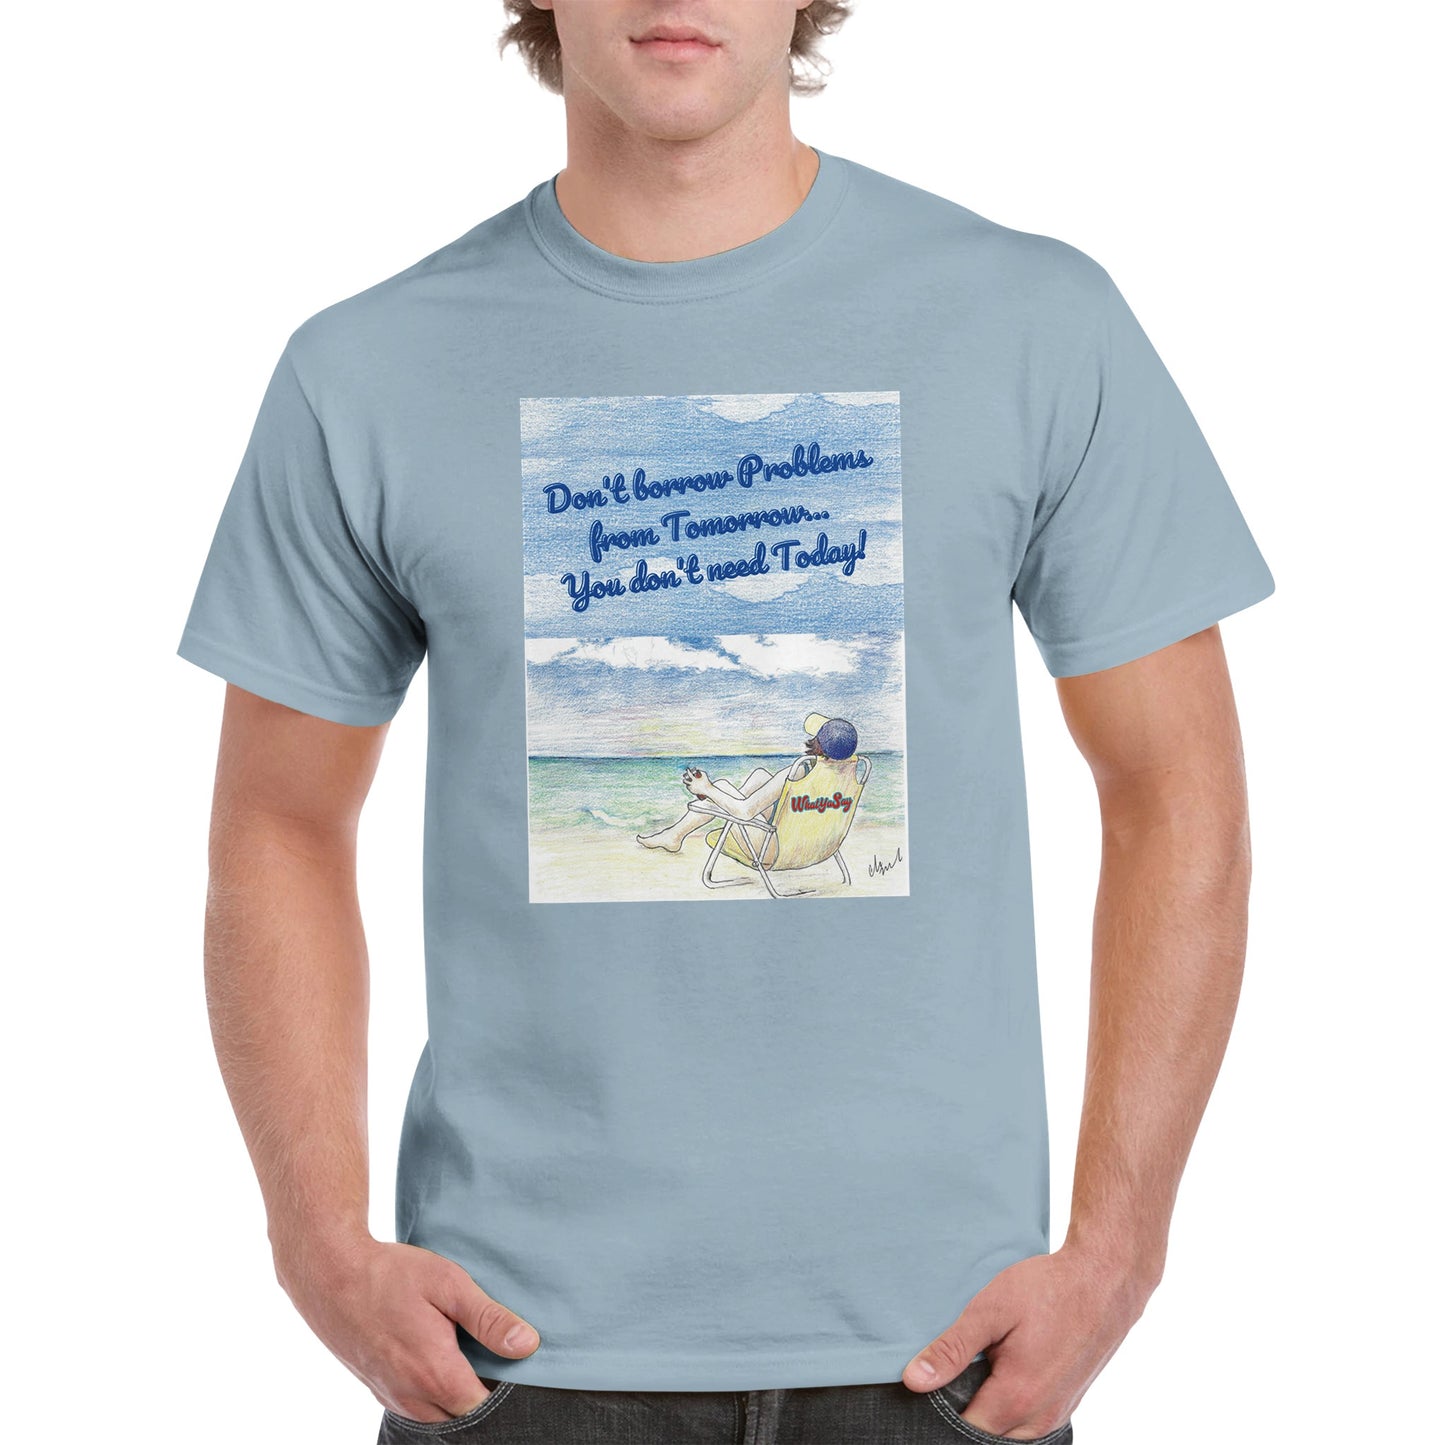 A light blue heavyweight Unisex Crewneck t-shirt with original artwork and motto Don’t borrow Problems from Tomorrow… You don’t need Today! on front with WhatYa Say logo on image from WhatYa Say Apparel worn by blonde-haired male front view.